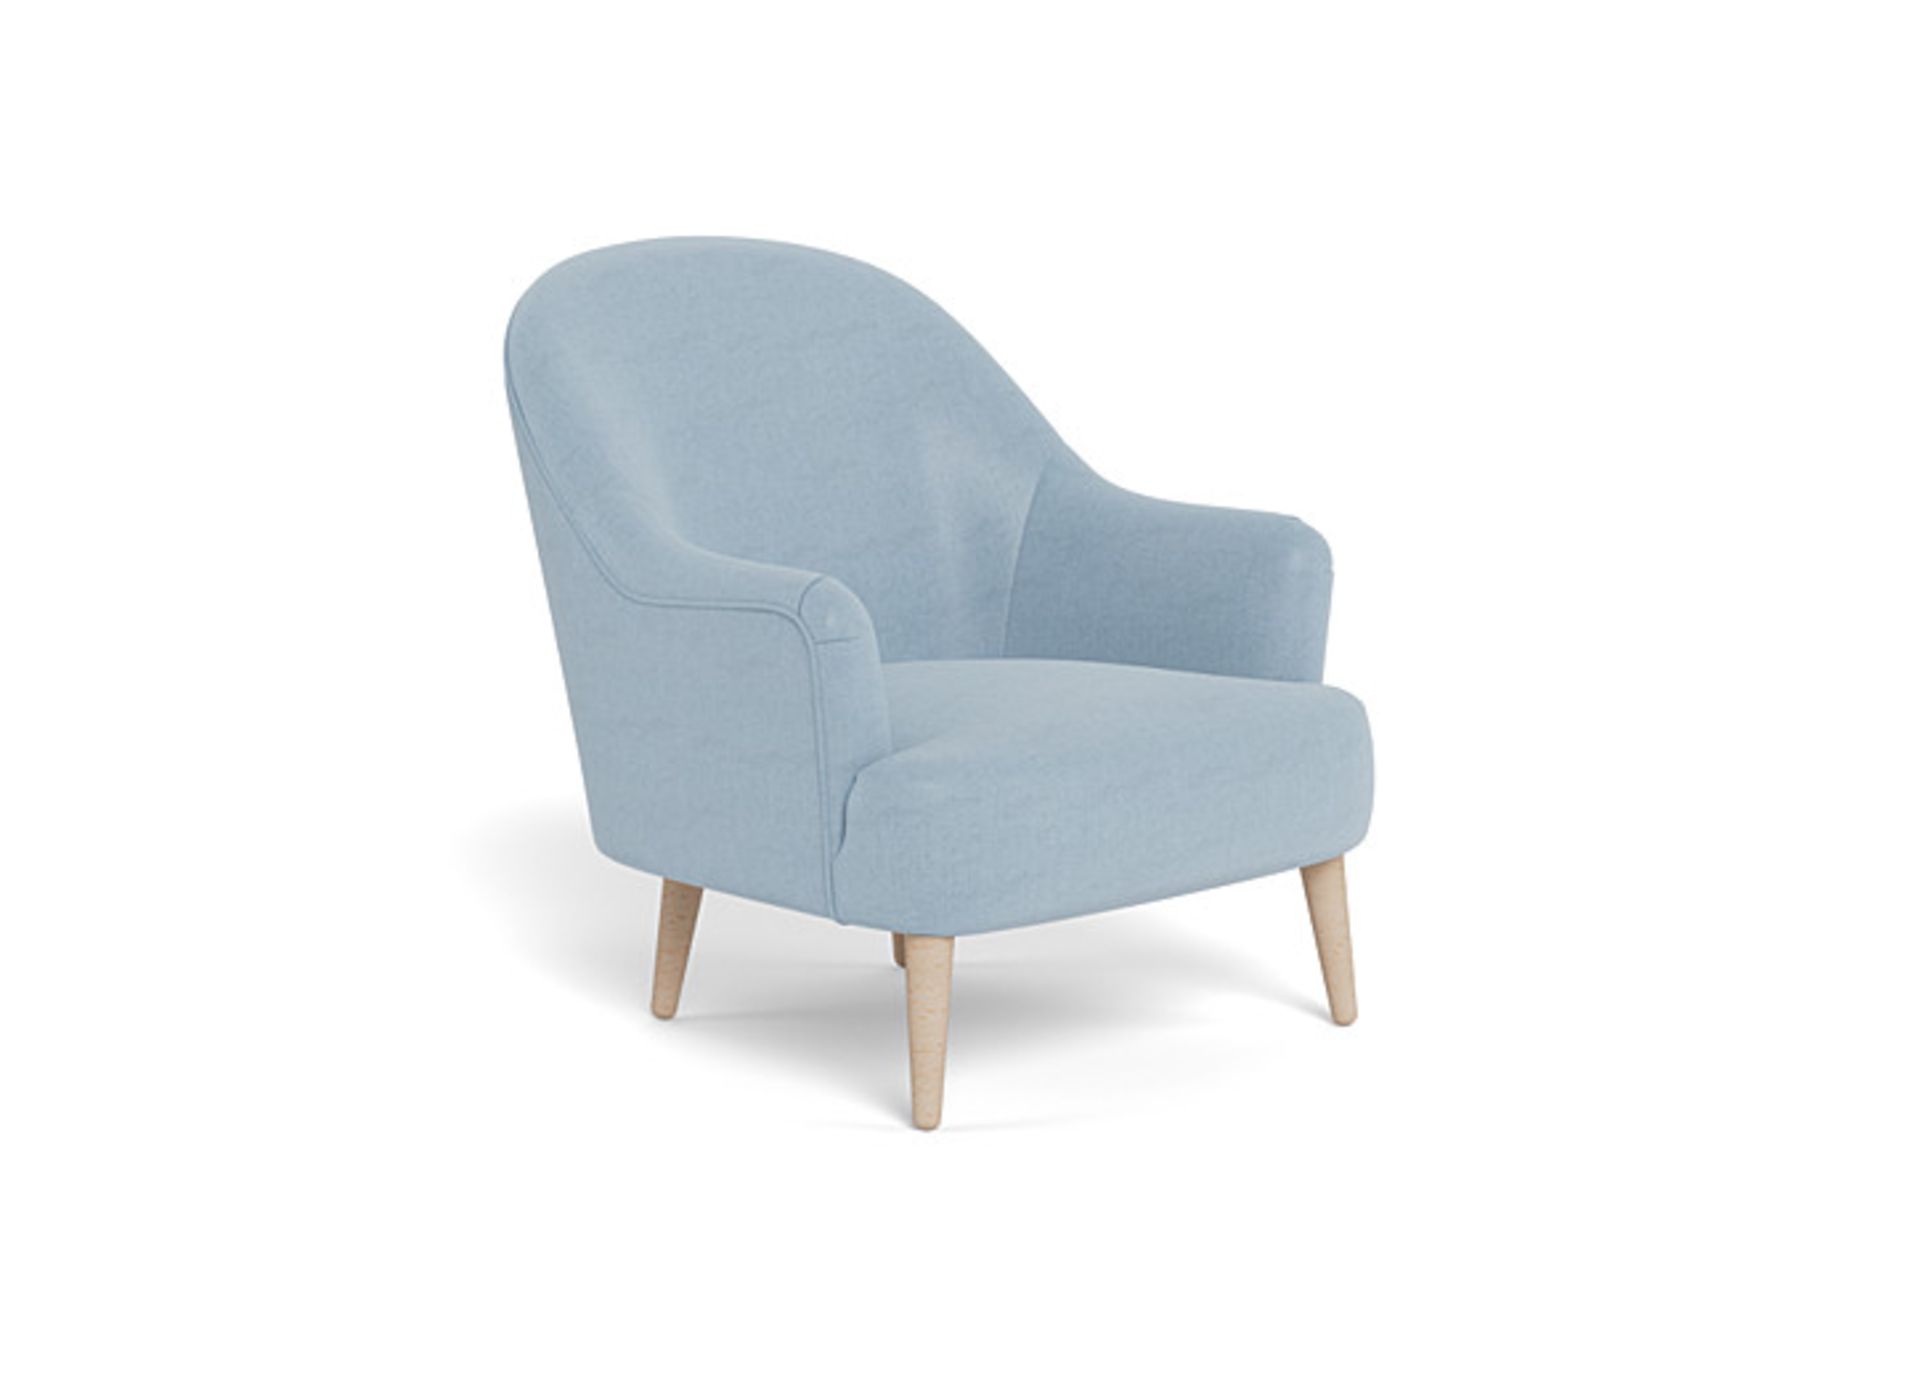 Heals Elgin Chair Pale Blue RRP 1199.00A perfectly proportioned accent chair, the Elgin resonates